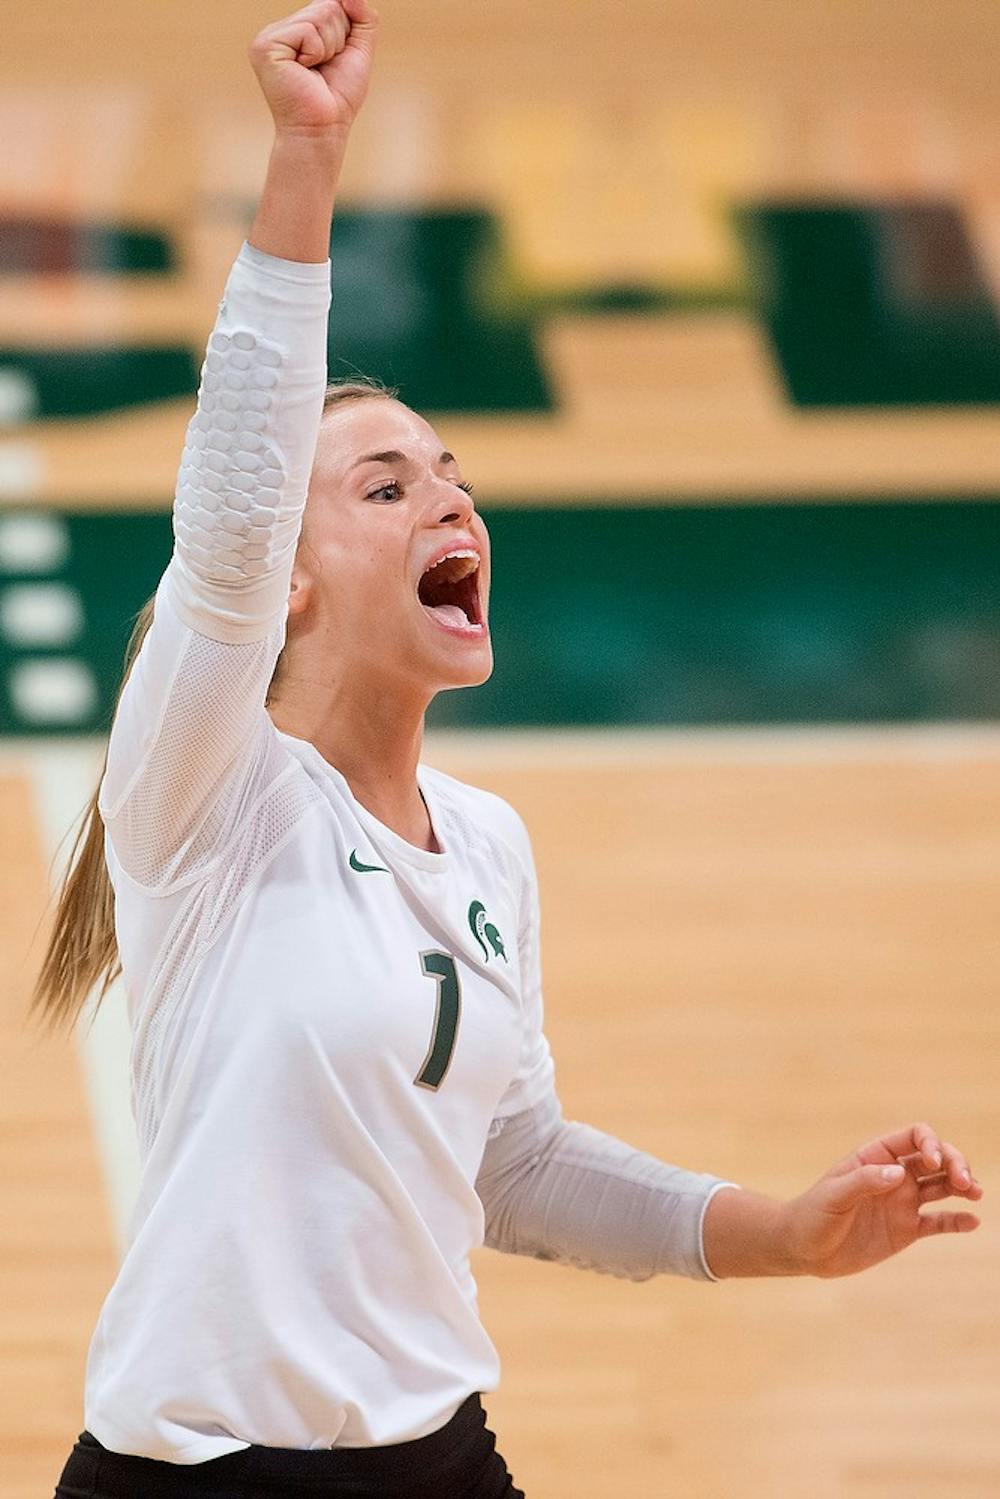 <p>Senior libero Kori Moster cheers after a Spartan point during the game against LIU Brooklyn on Sept. 19, 2014, at Jenison Field House. The Spartans lost, 3-2. Julia Nagy/The State News</p>